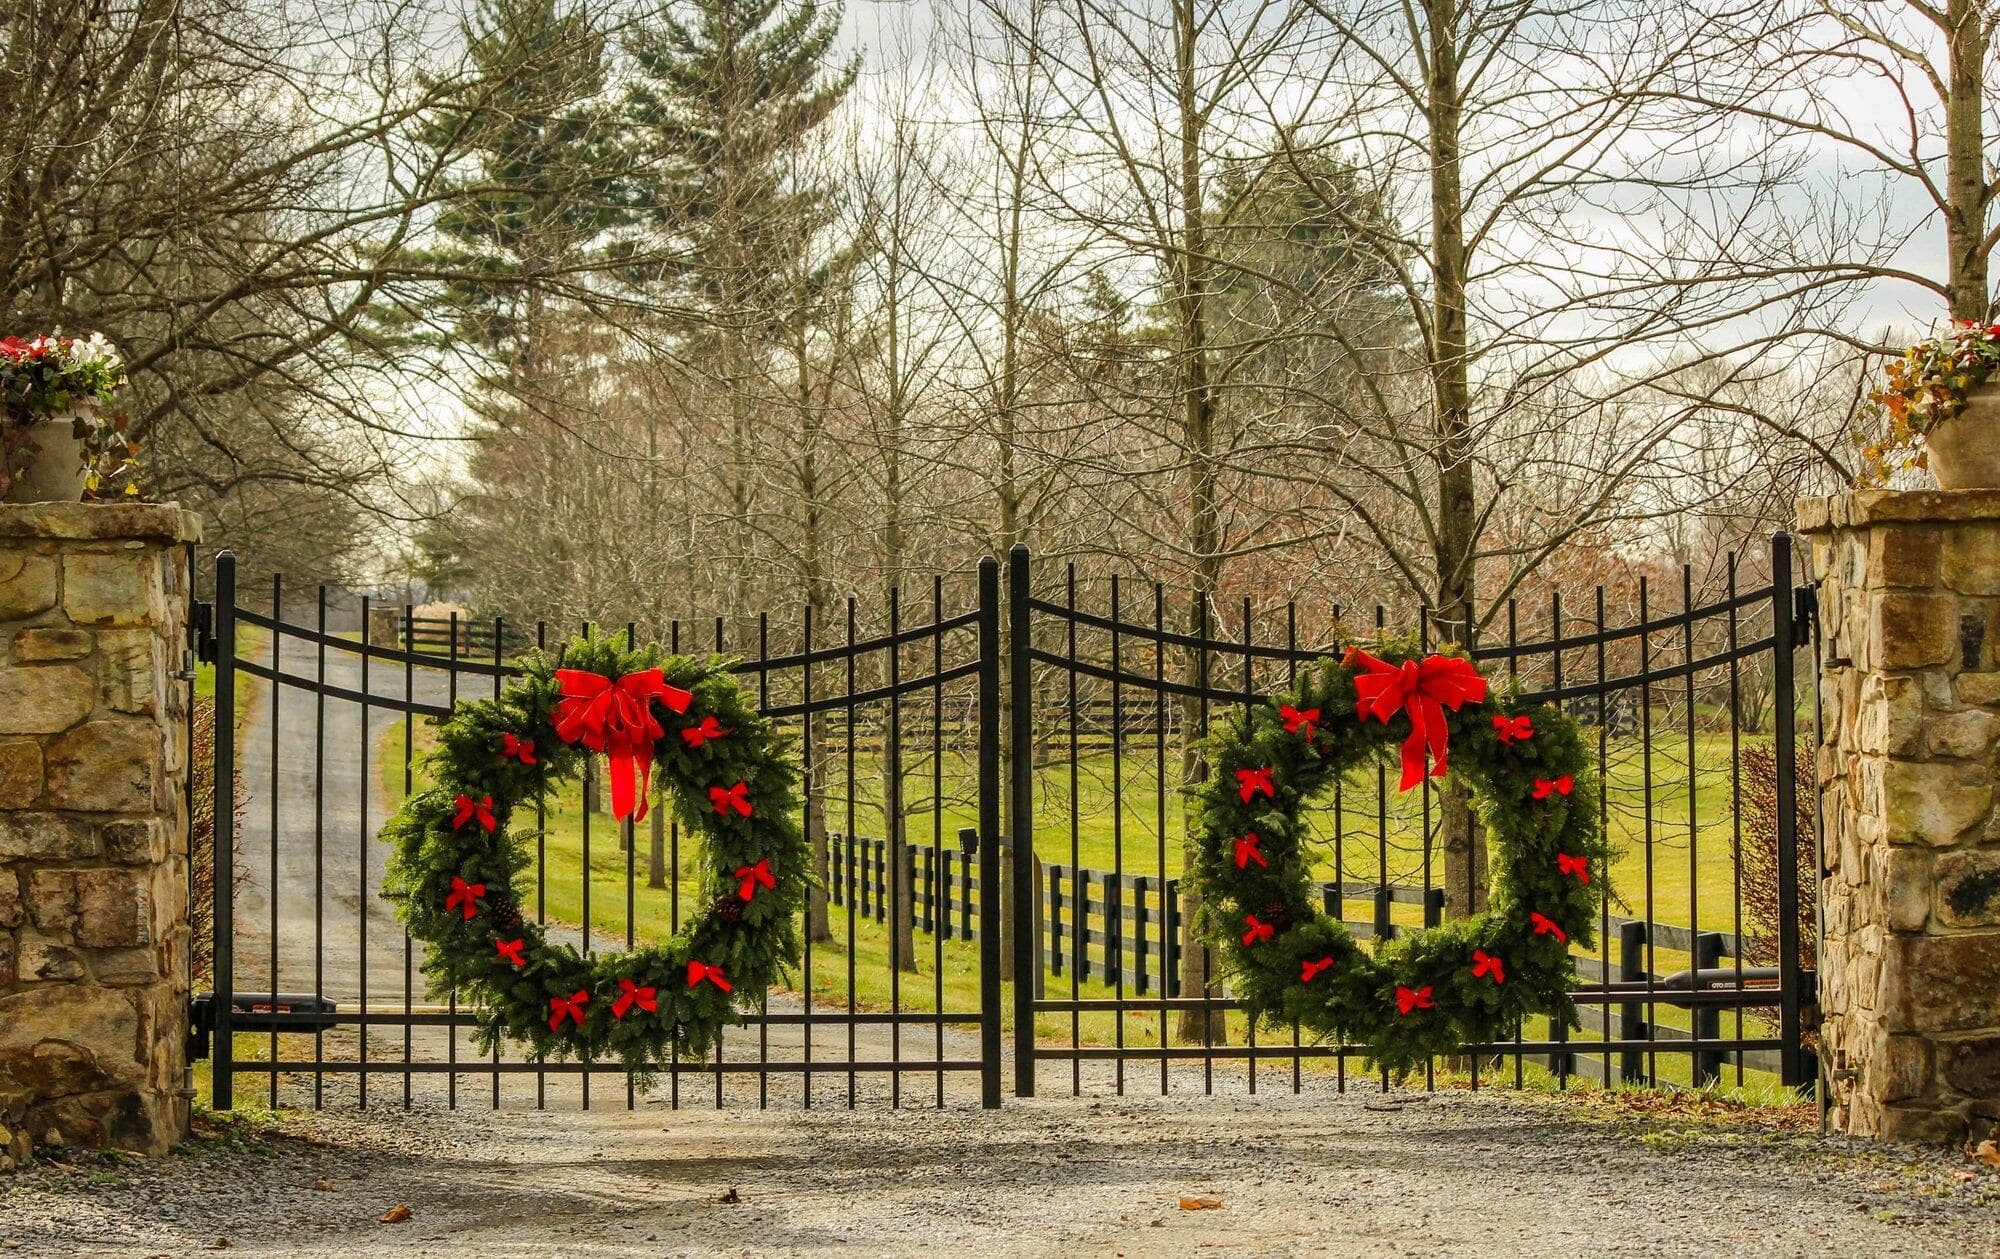 Holiday Cheer or HOA Fines? A Guide to HOA Holiday Decorating Rules